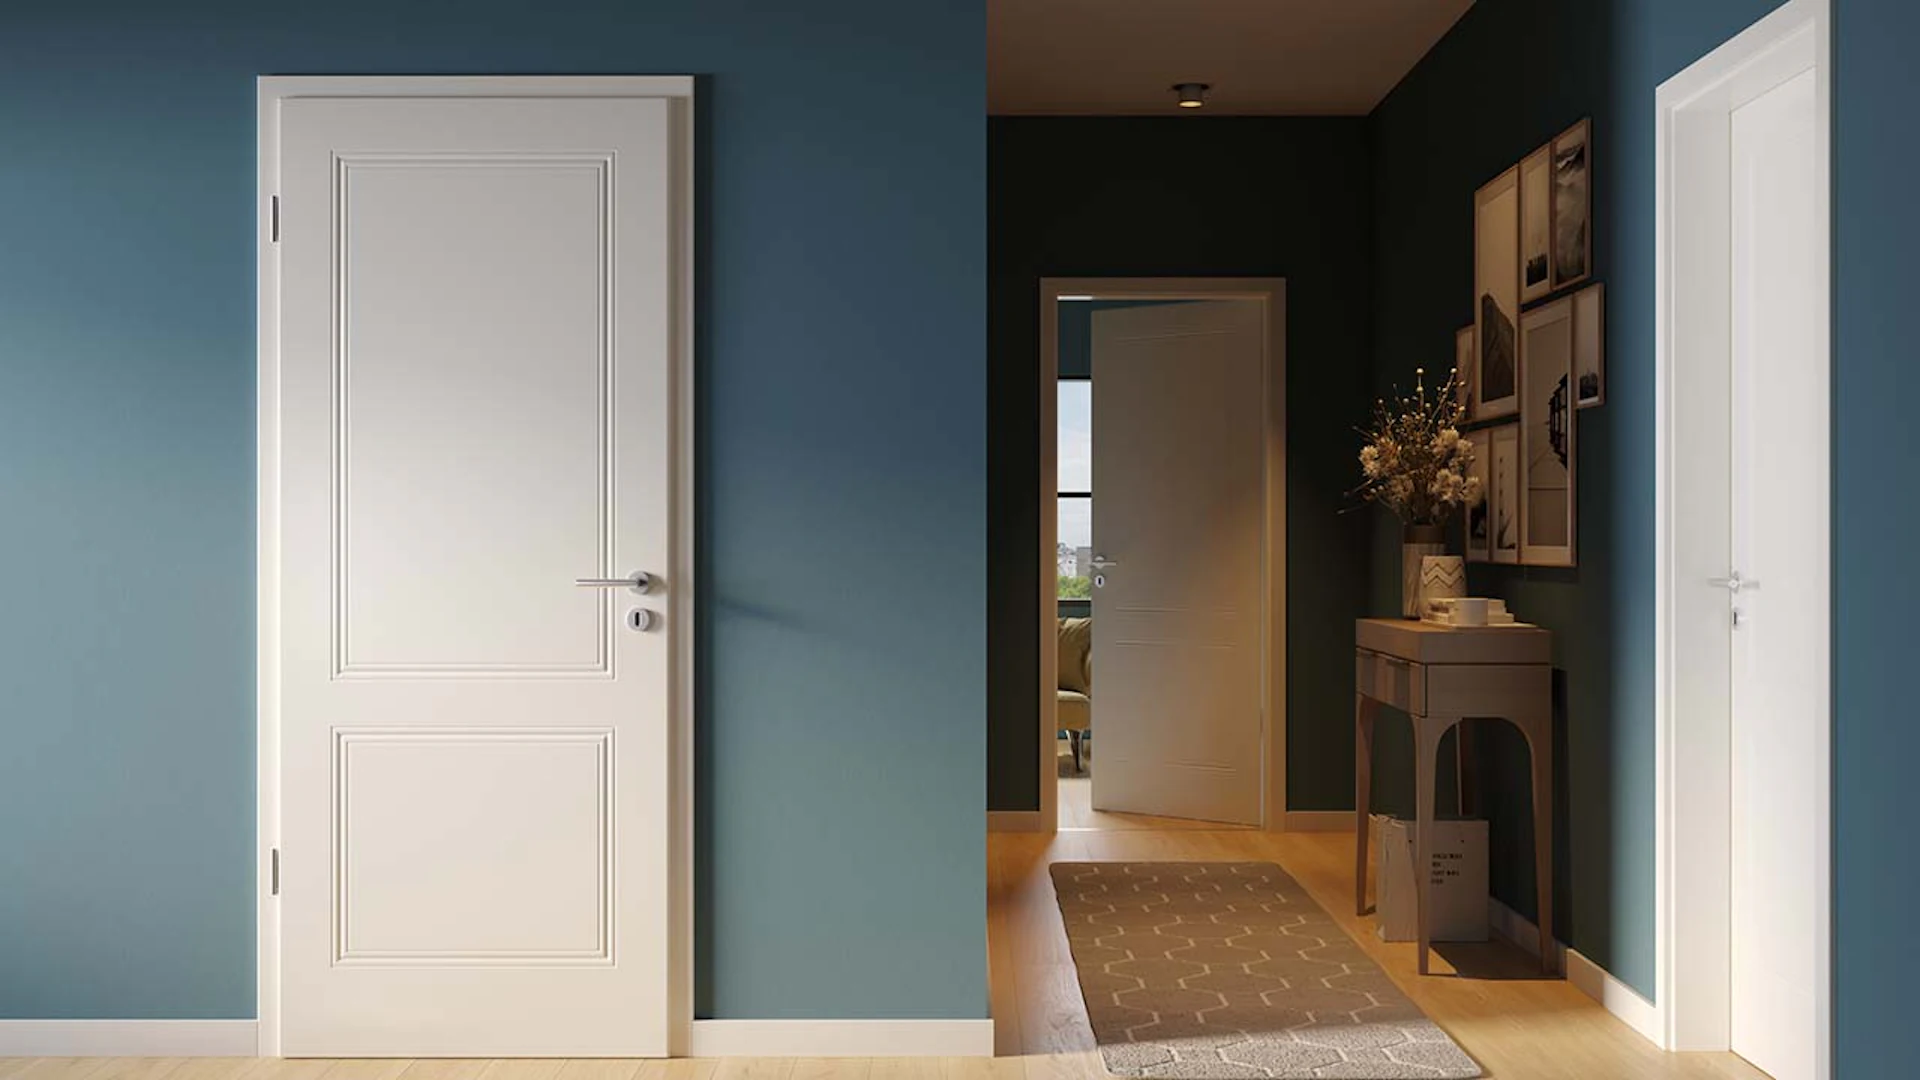 planeo interior door lacquer 2.0 - Aiko 9016 white lacquer 1985 x 610 mm DIN L - round RSP hinge 3-t